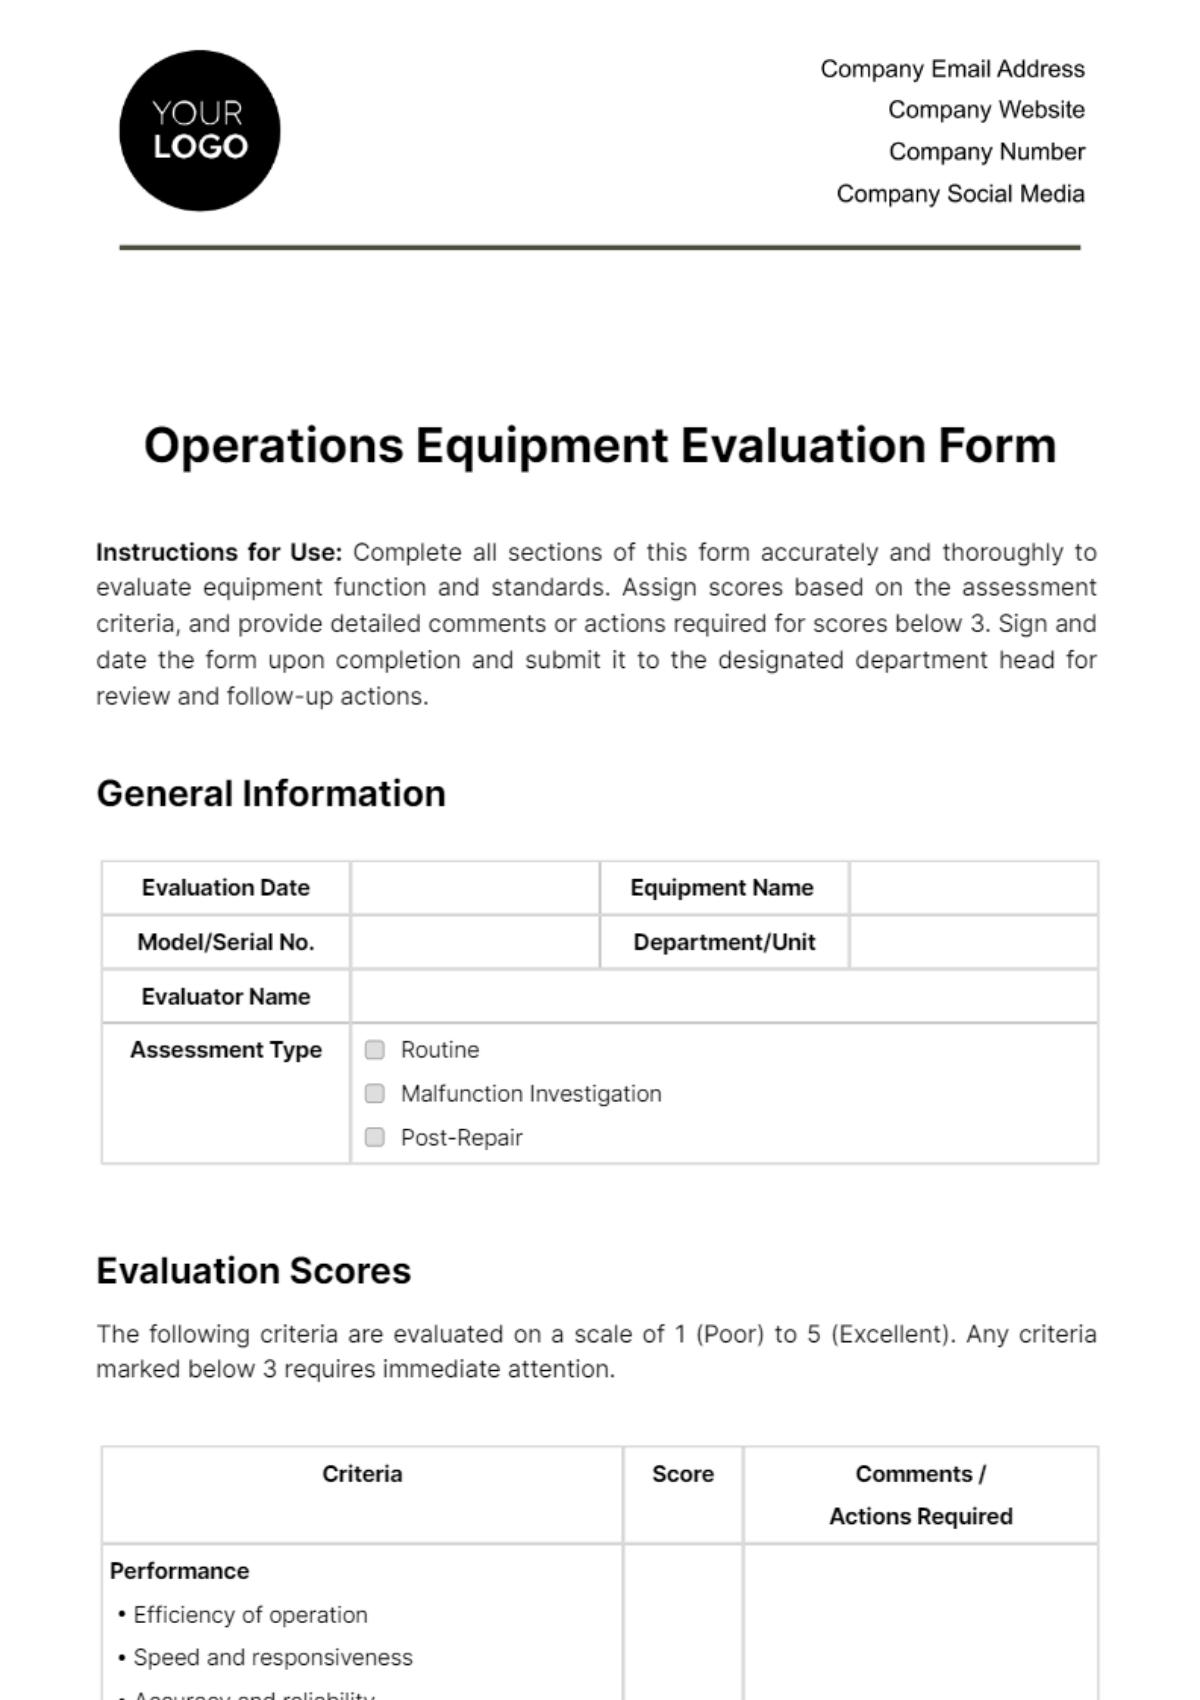 Free Operations Equipment Evaluation Form Template